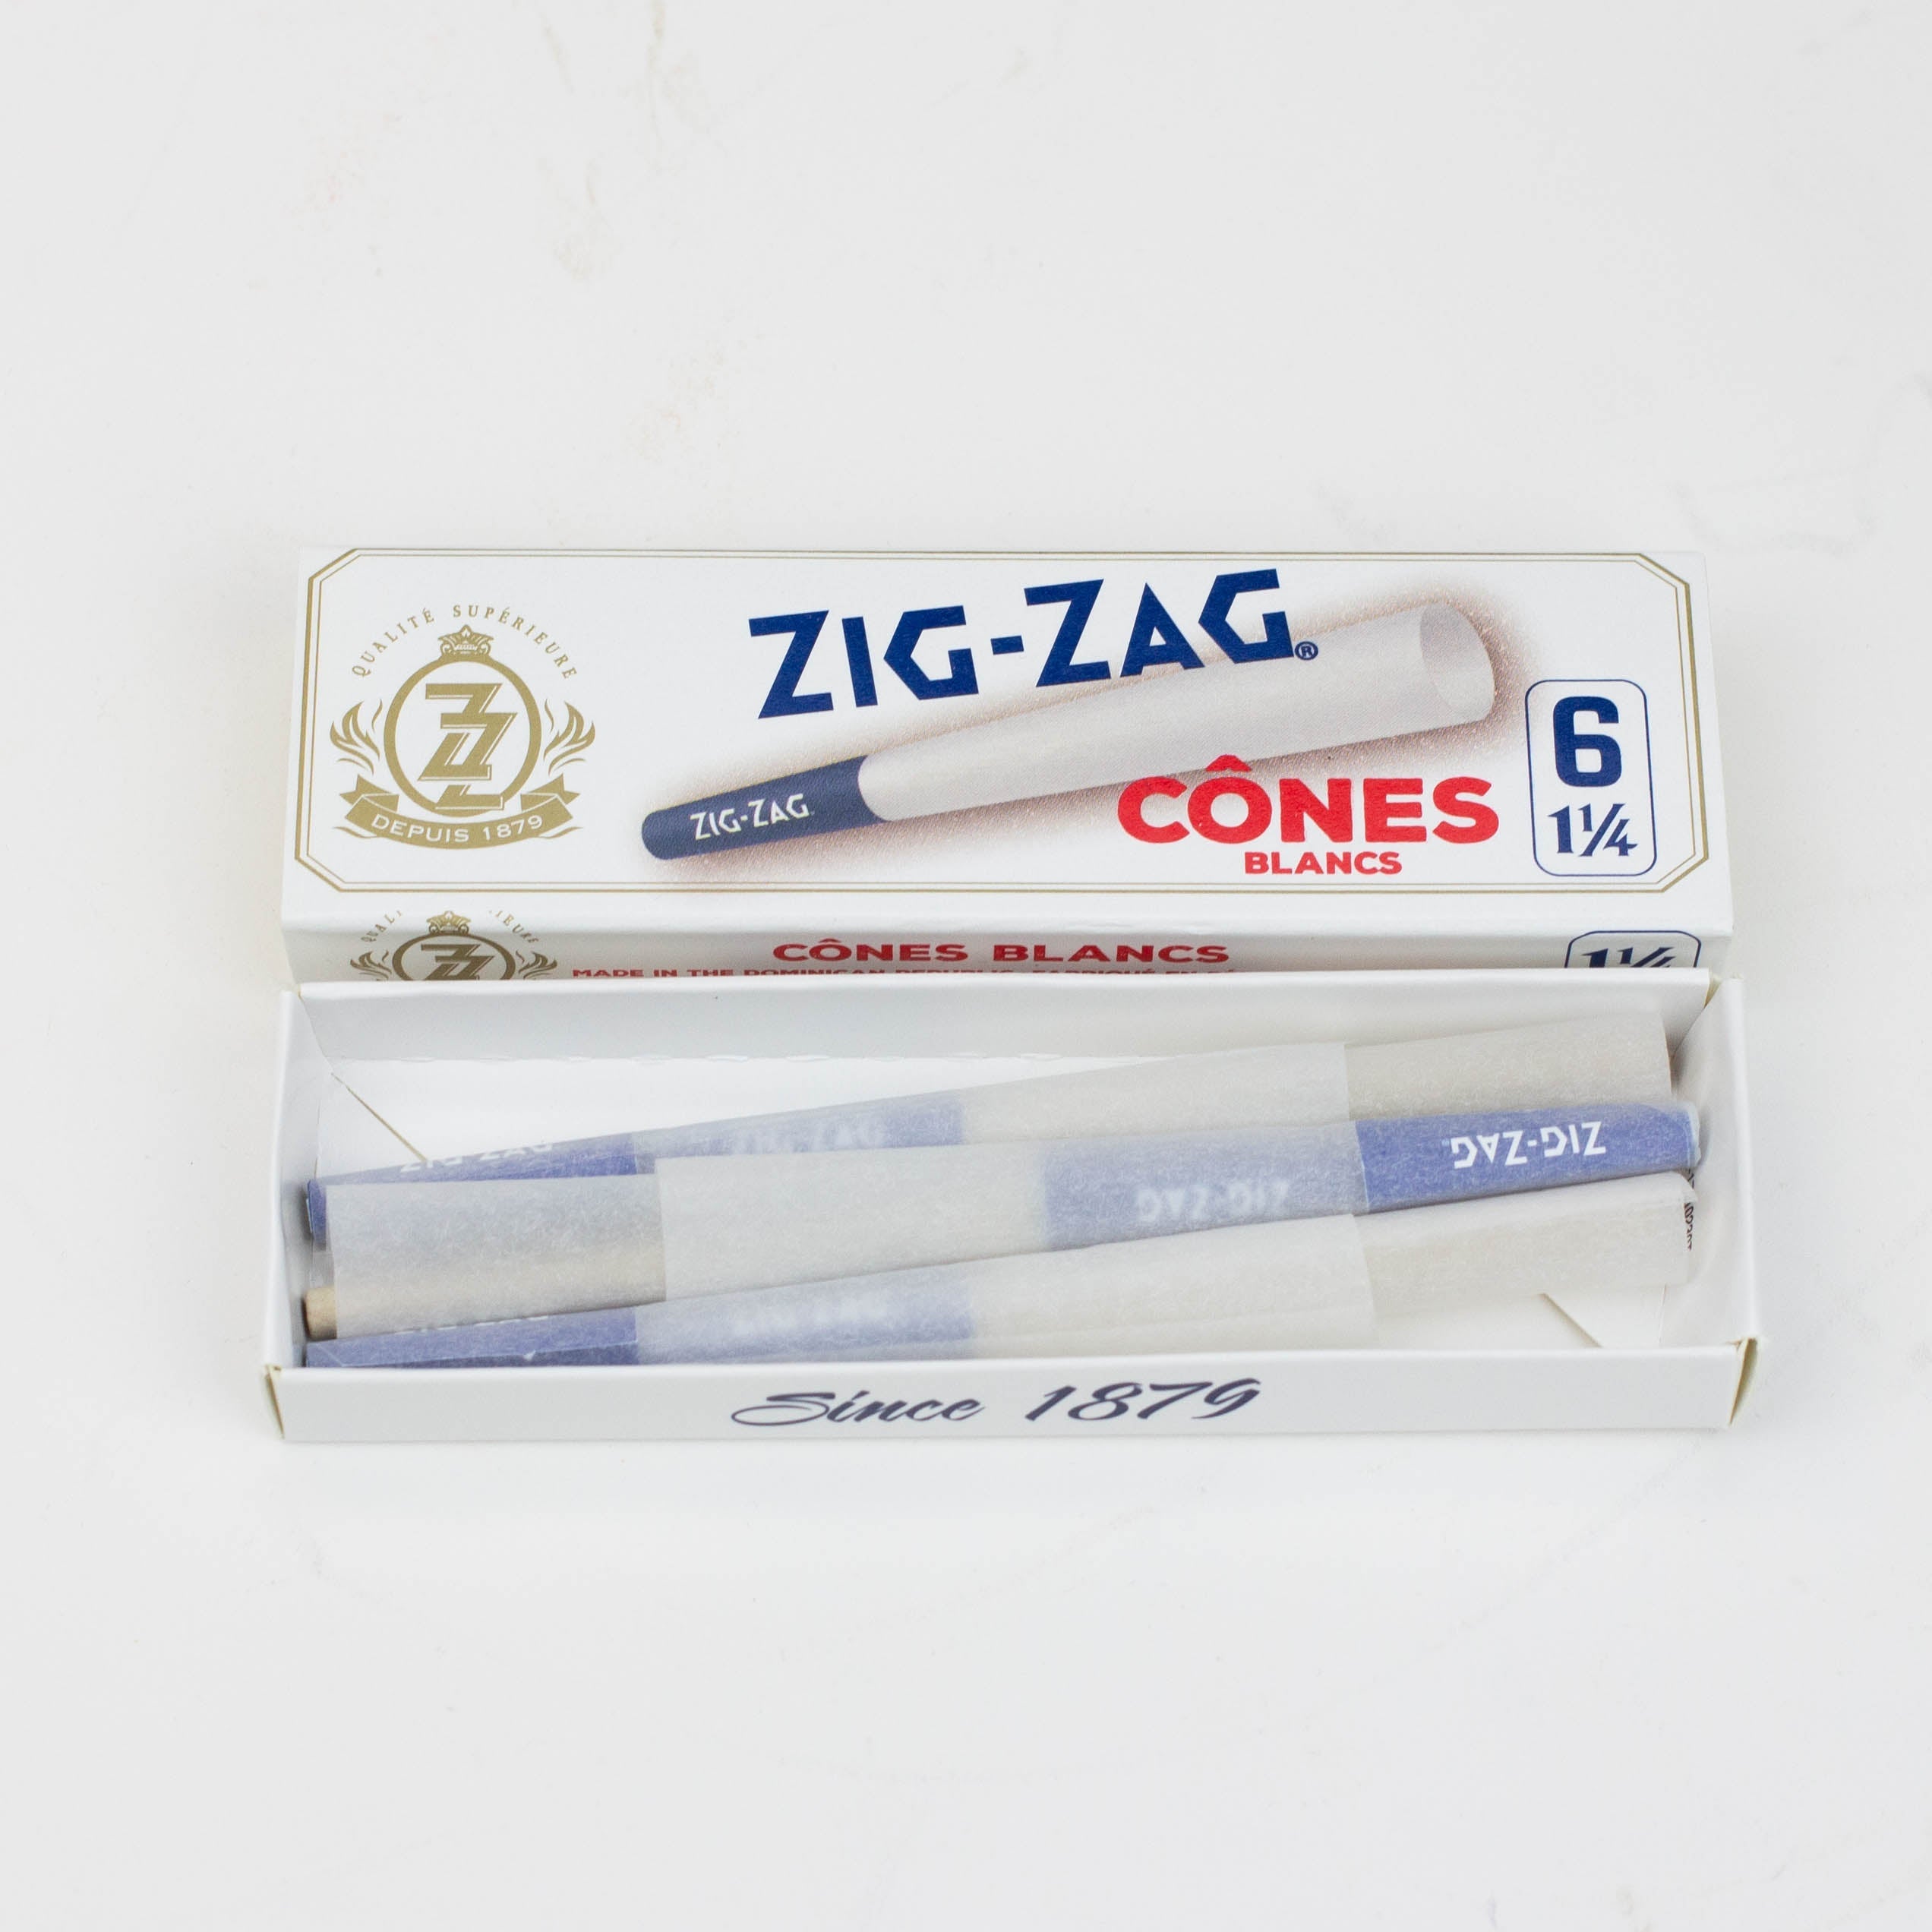 Pre-Rolled Cones - Zig-Zag White 1 1/4 Papers Box of 24_1